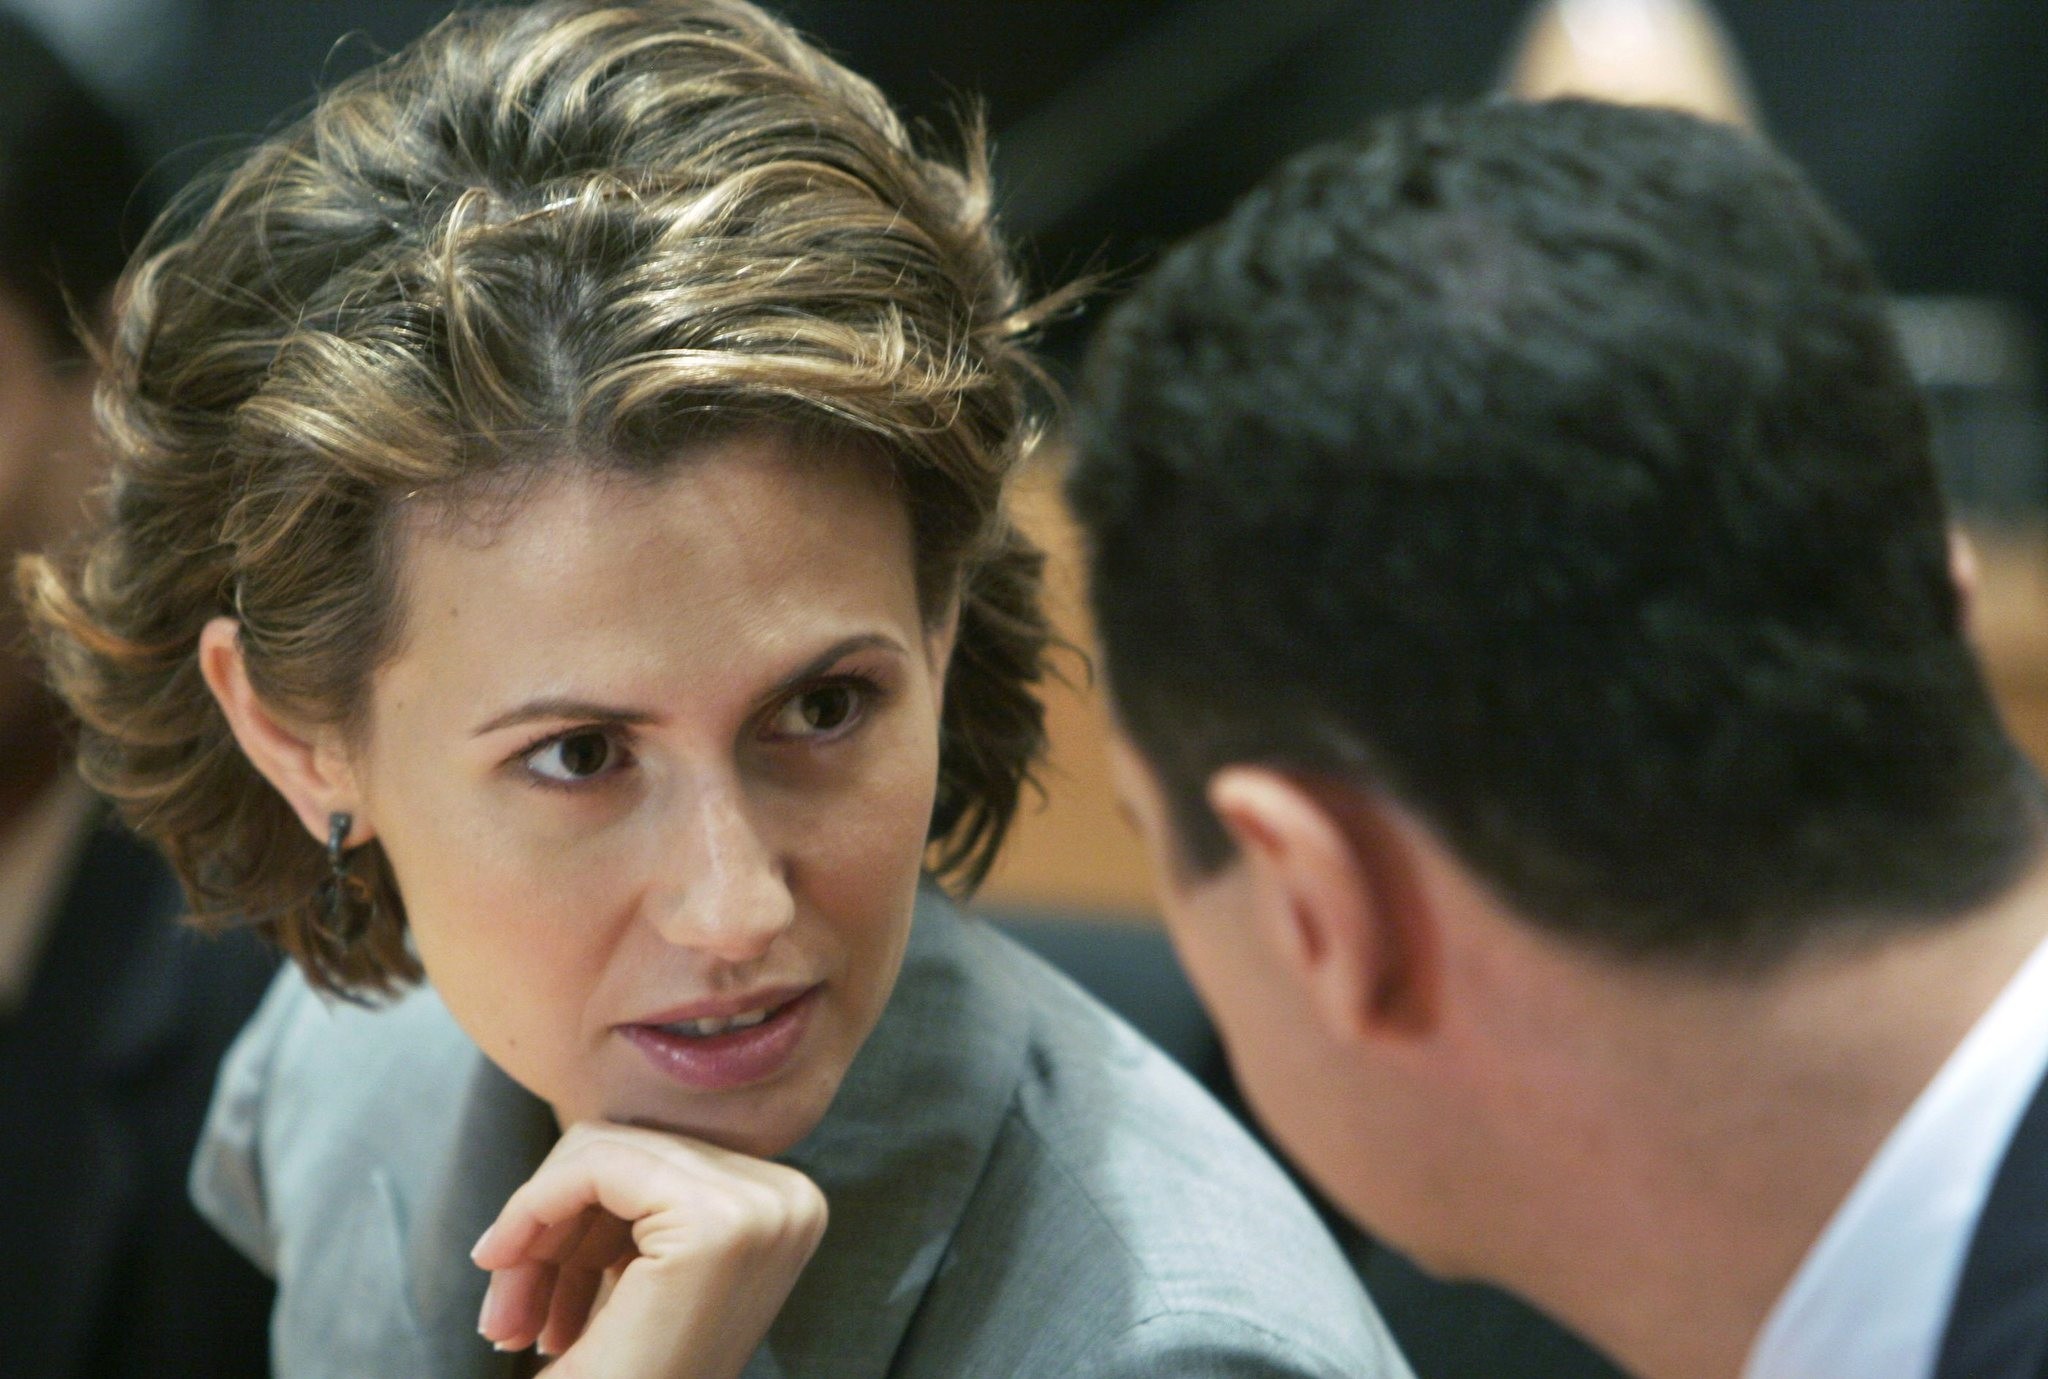 In this 2008 file photo, Bashar Assad, right, listens to his wife Asma Assad during their visit to the campus of Infosys Technologies Ltd in Bangalore, India. (AP Photo)